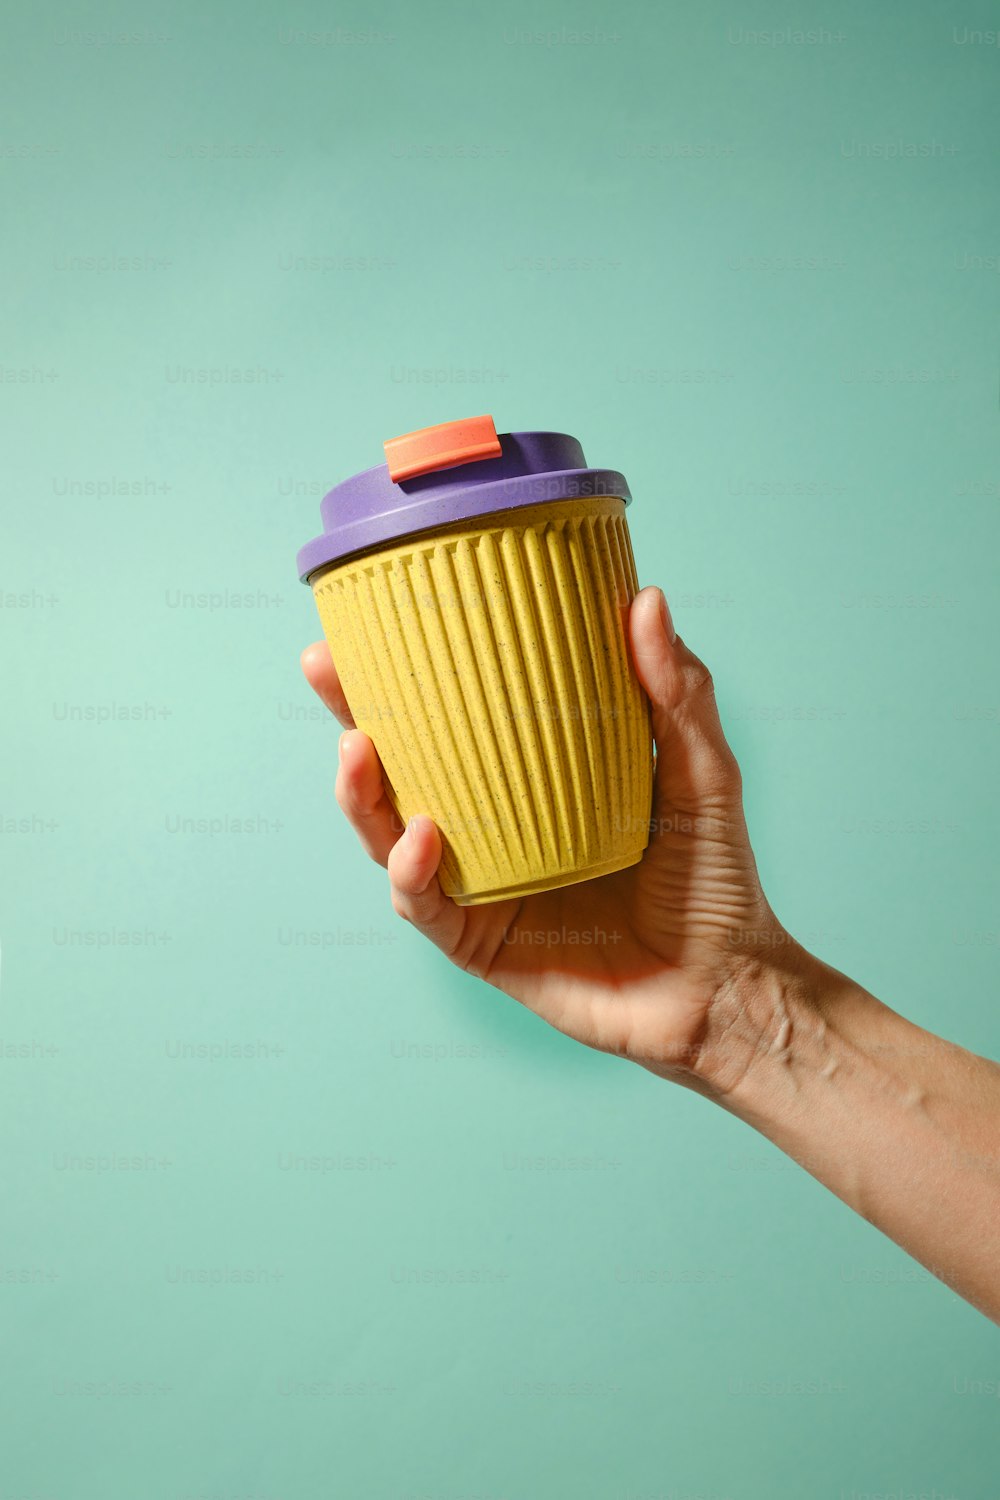 a hand holding a yellow cup with a purple lid